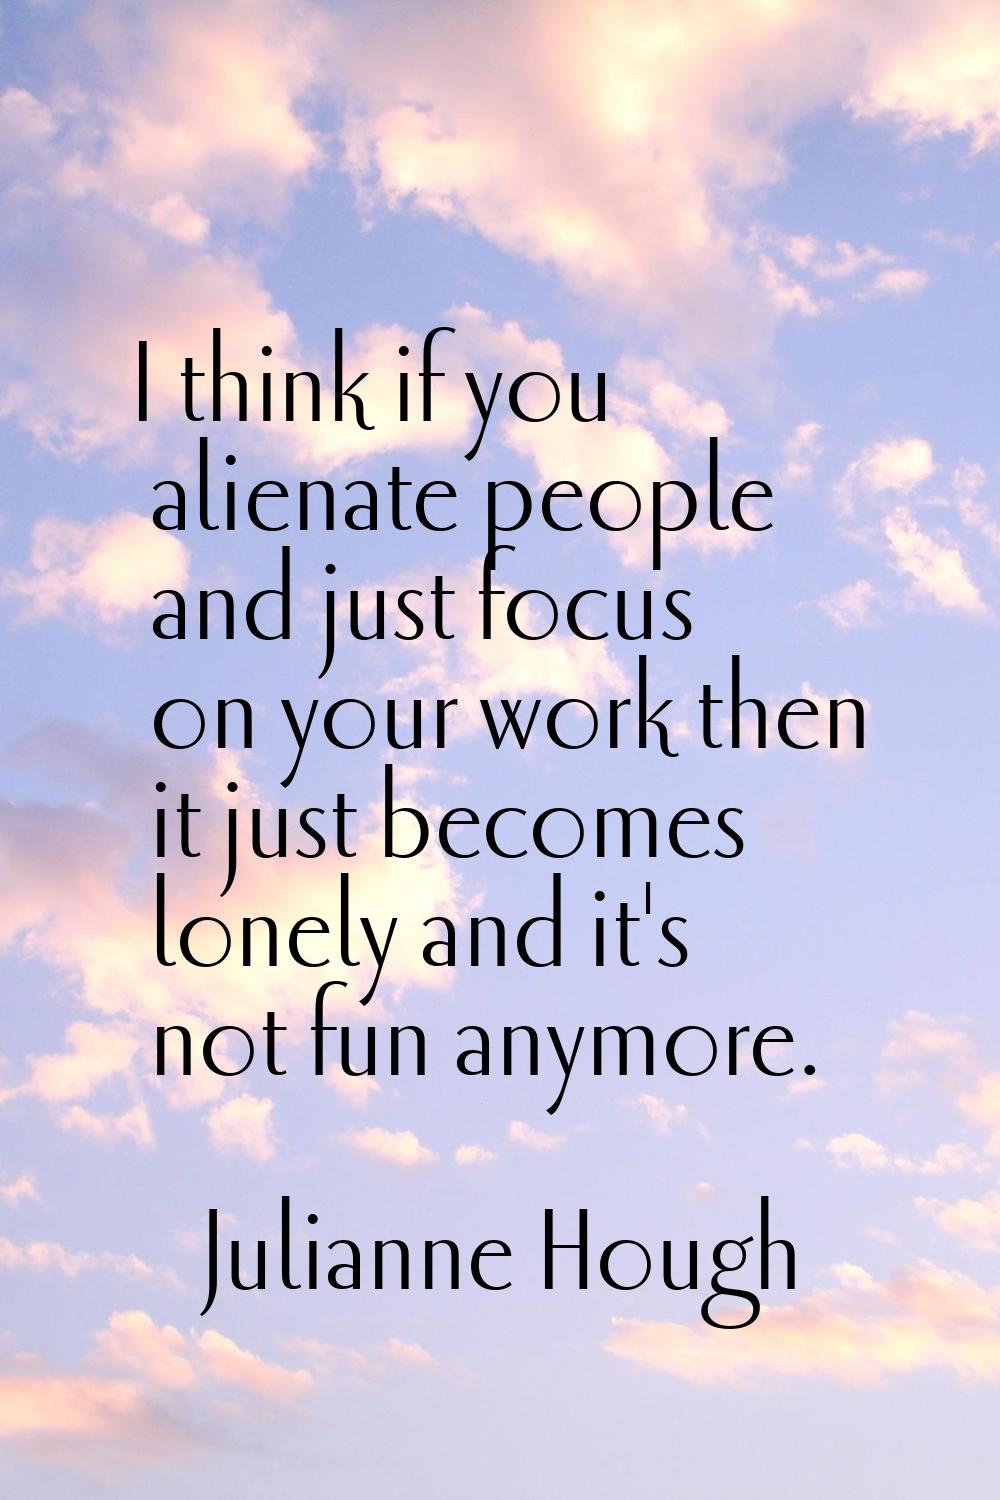 I think if you alienate people and just focus on your work then it just becomes lonely and it's not